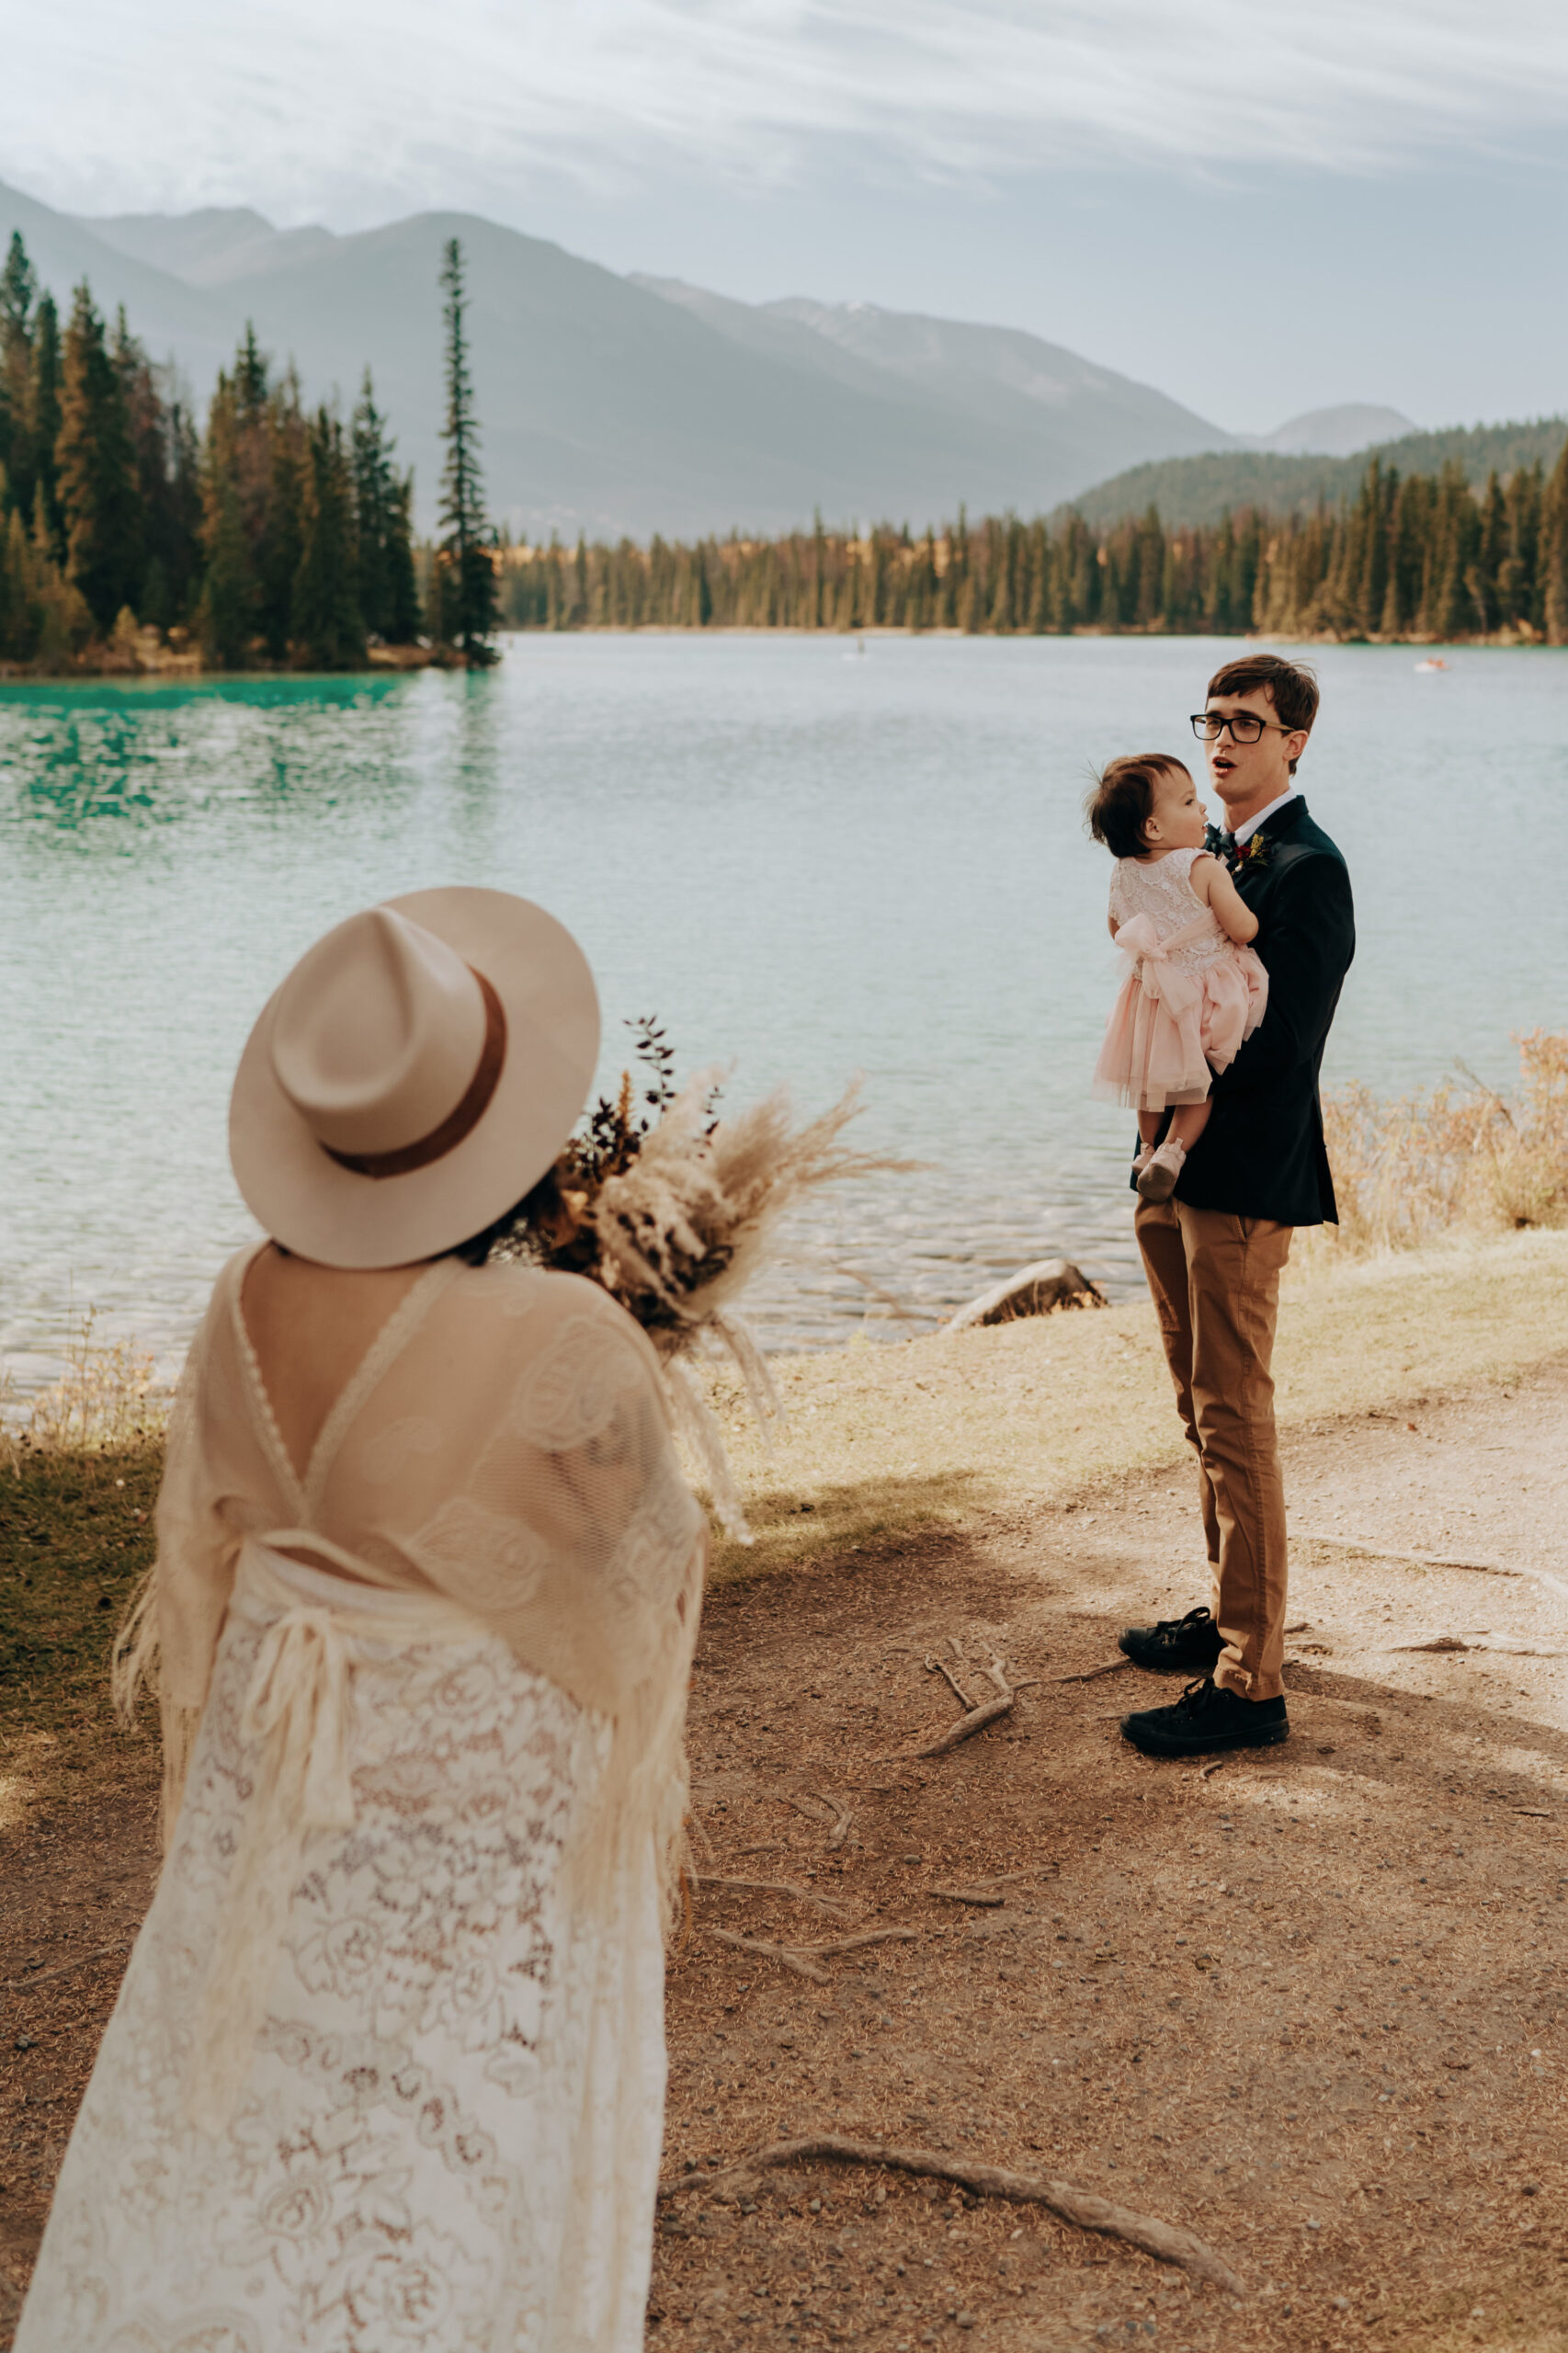 Boho bride in cute hat has first look with boho groom holding adorable baby